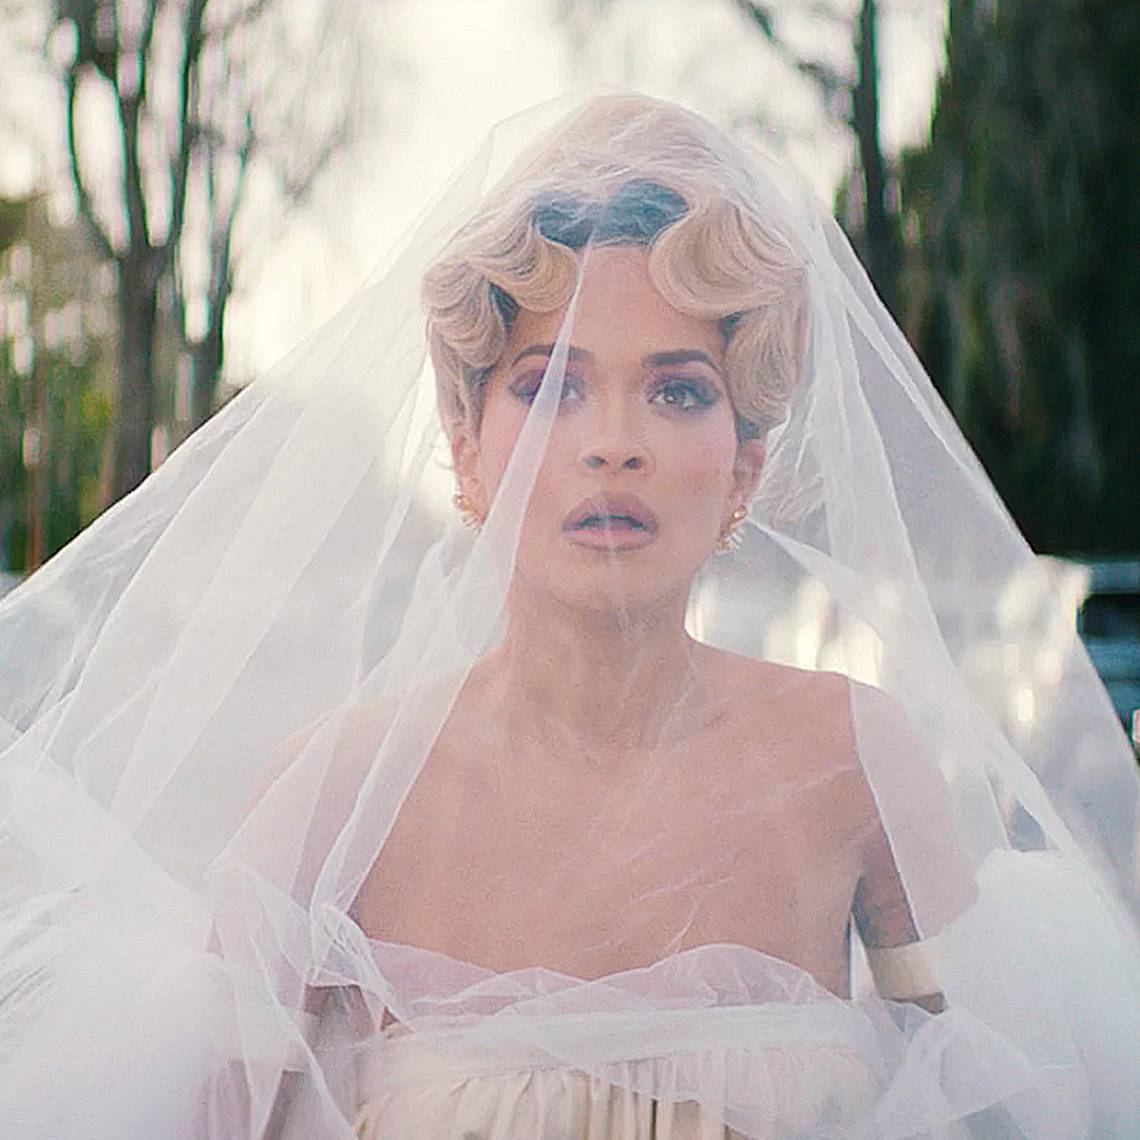 Rita Ora in the music video for You Only Love Me